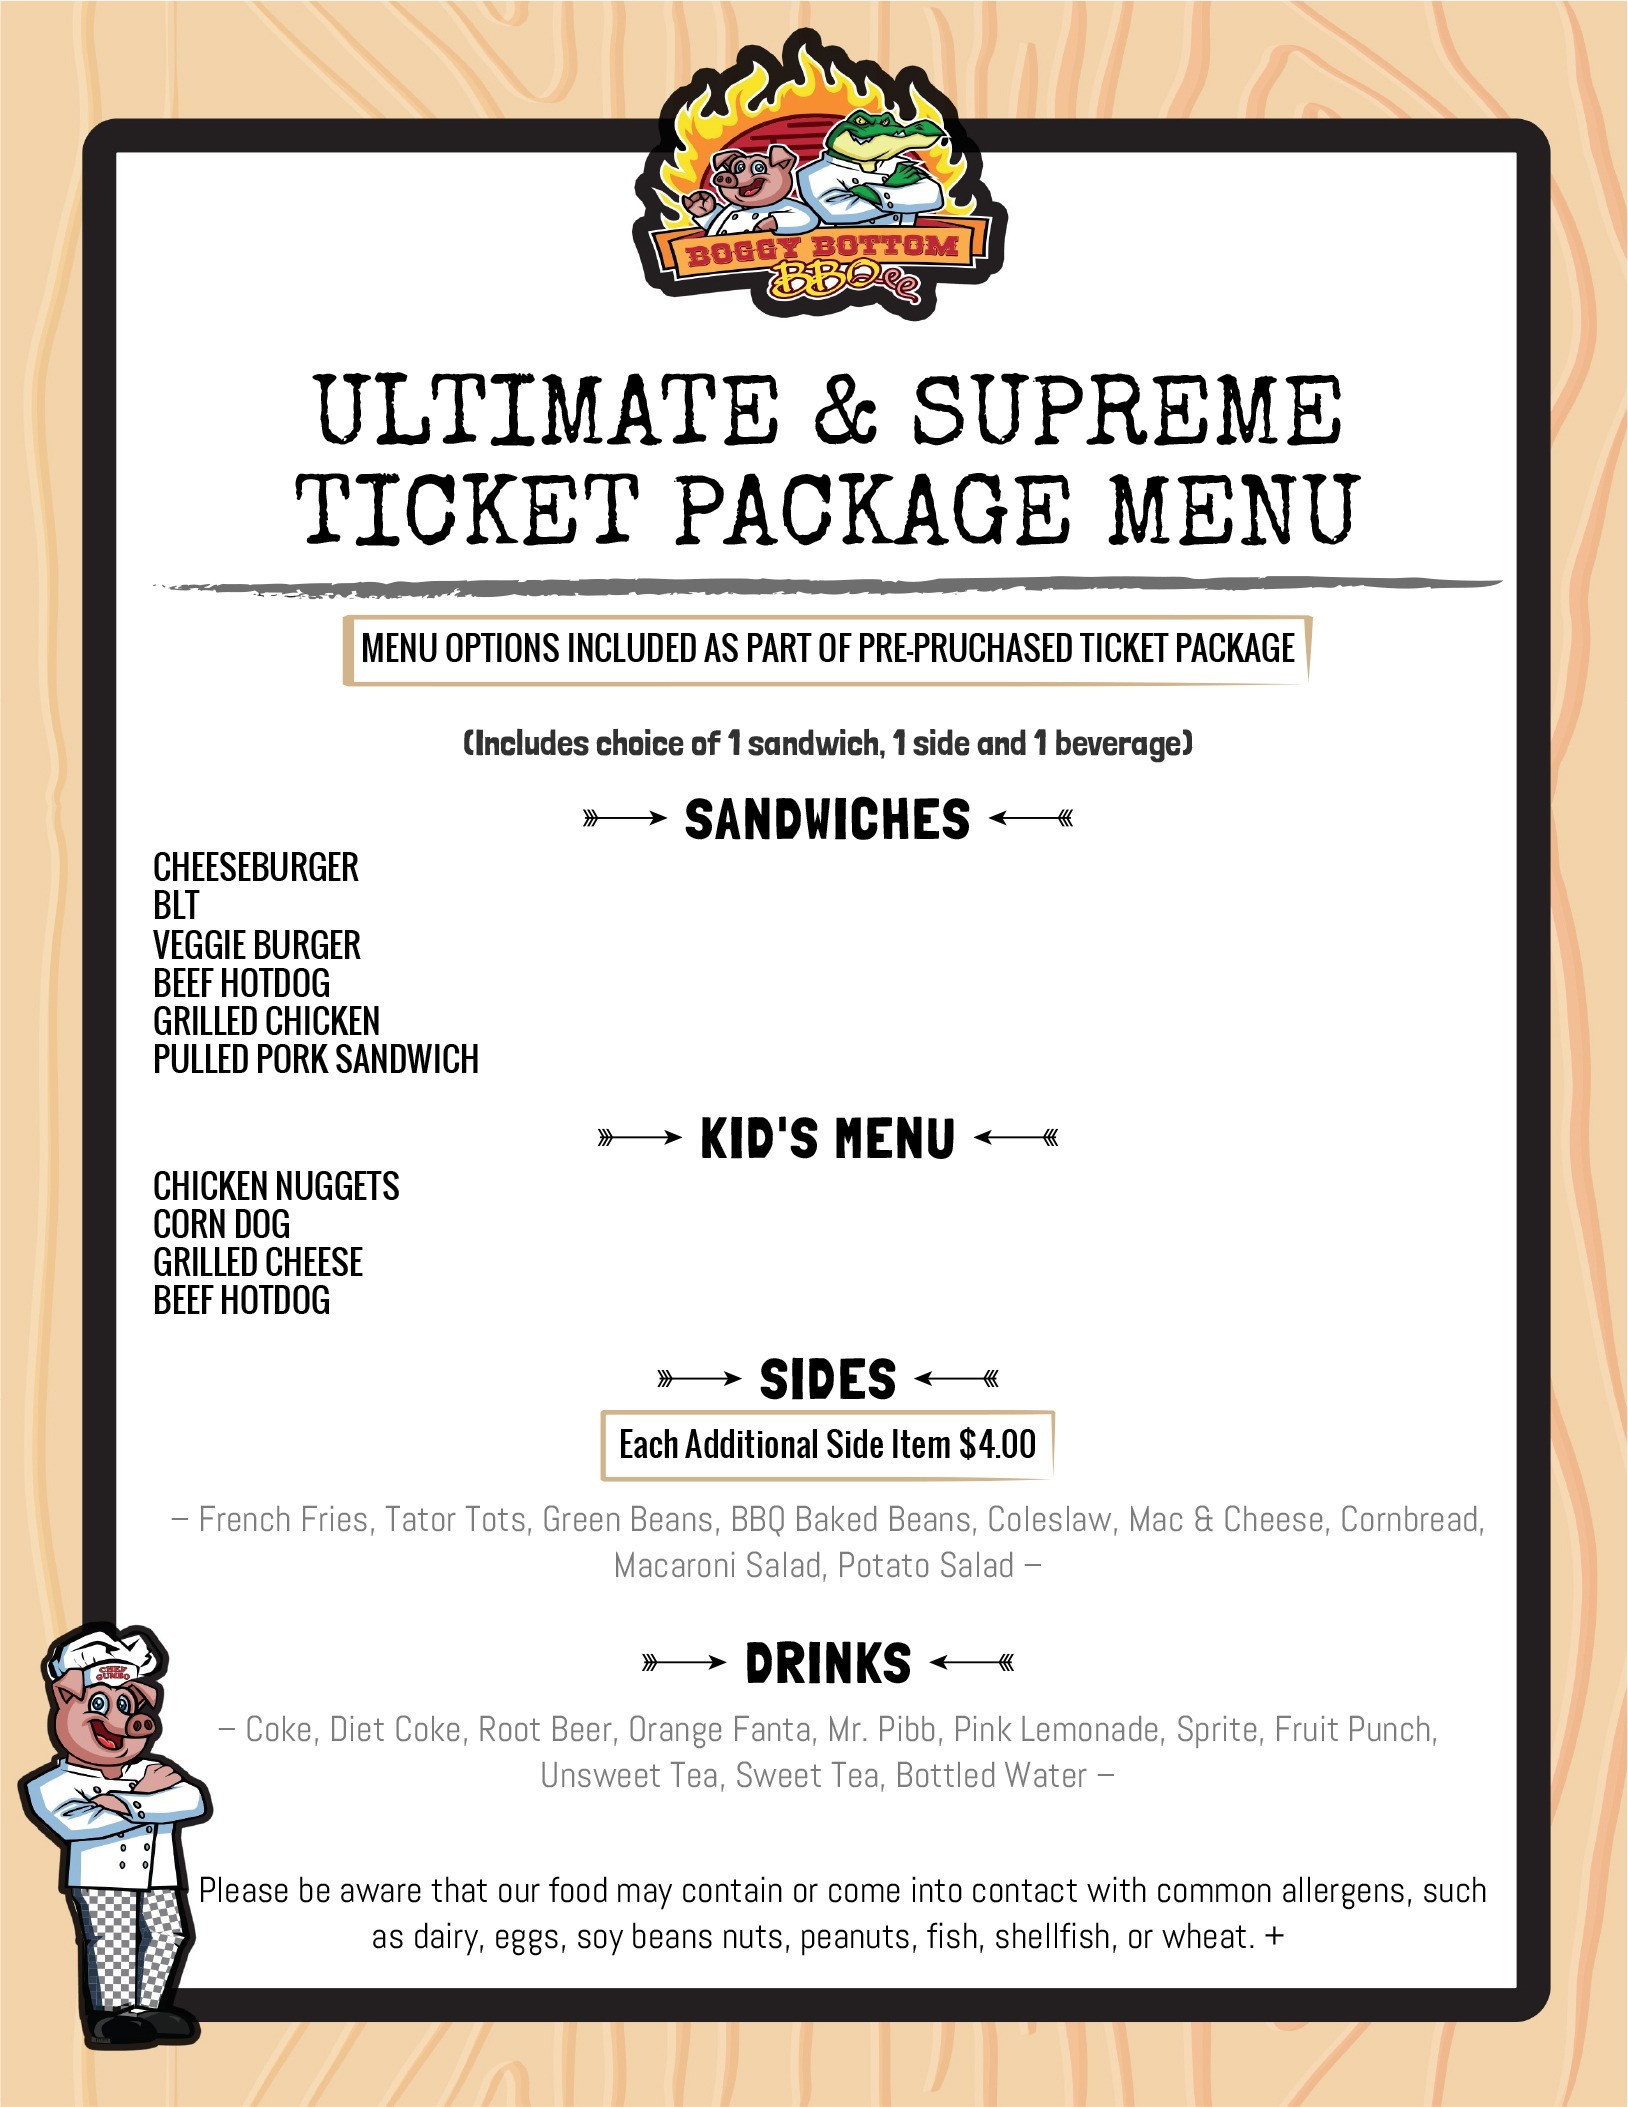 untimate and supreme tick package menu image